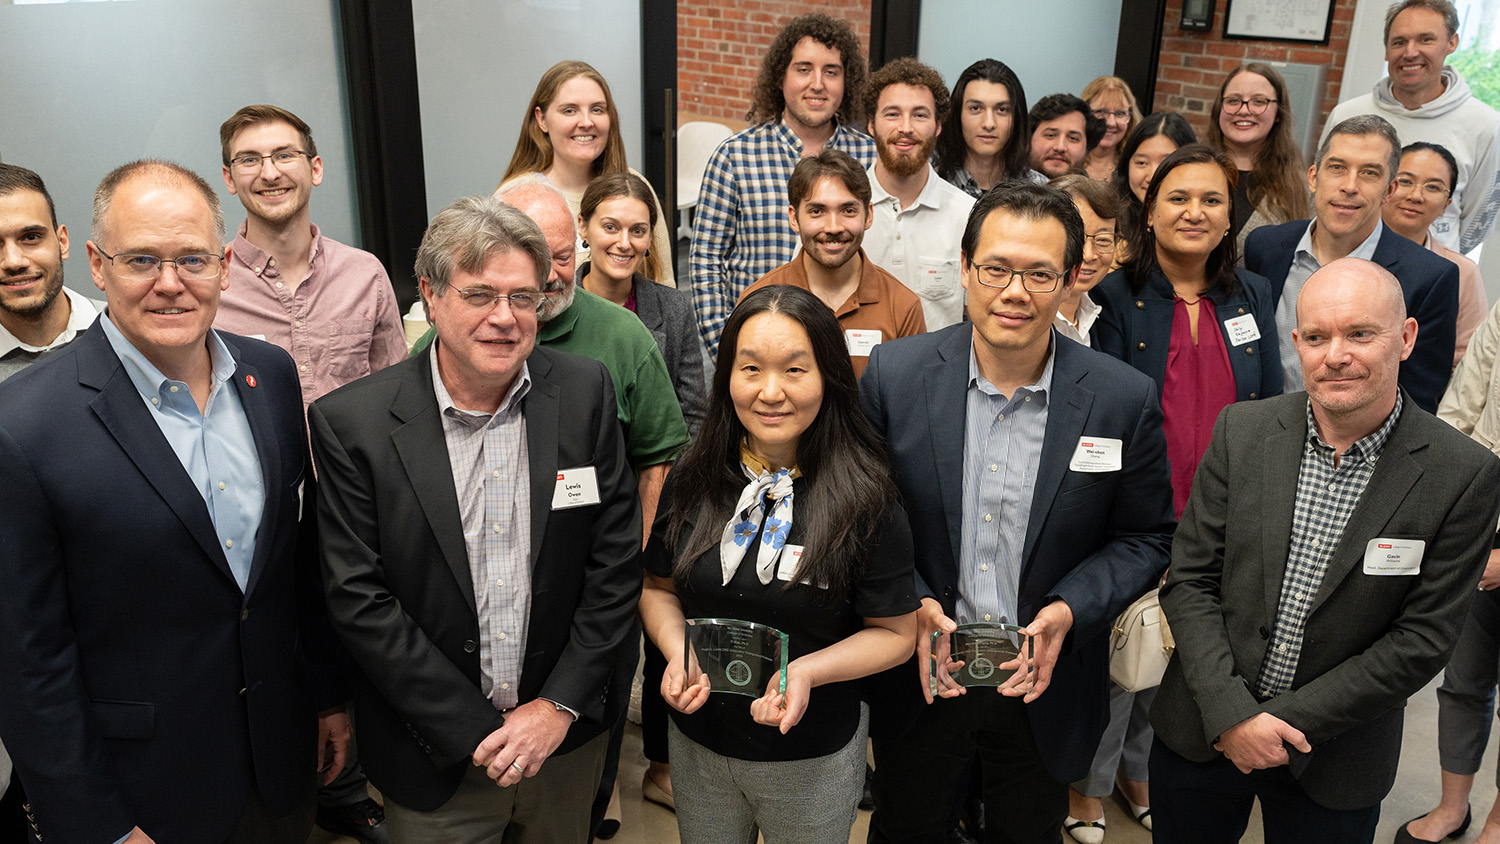 The attendees at the LORD Distinguished Professorship reception pose for a photo, including Yi Xiao and Wei-chen Chang